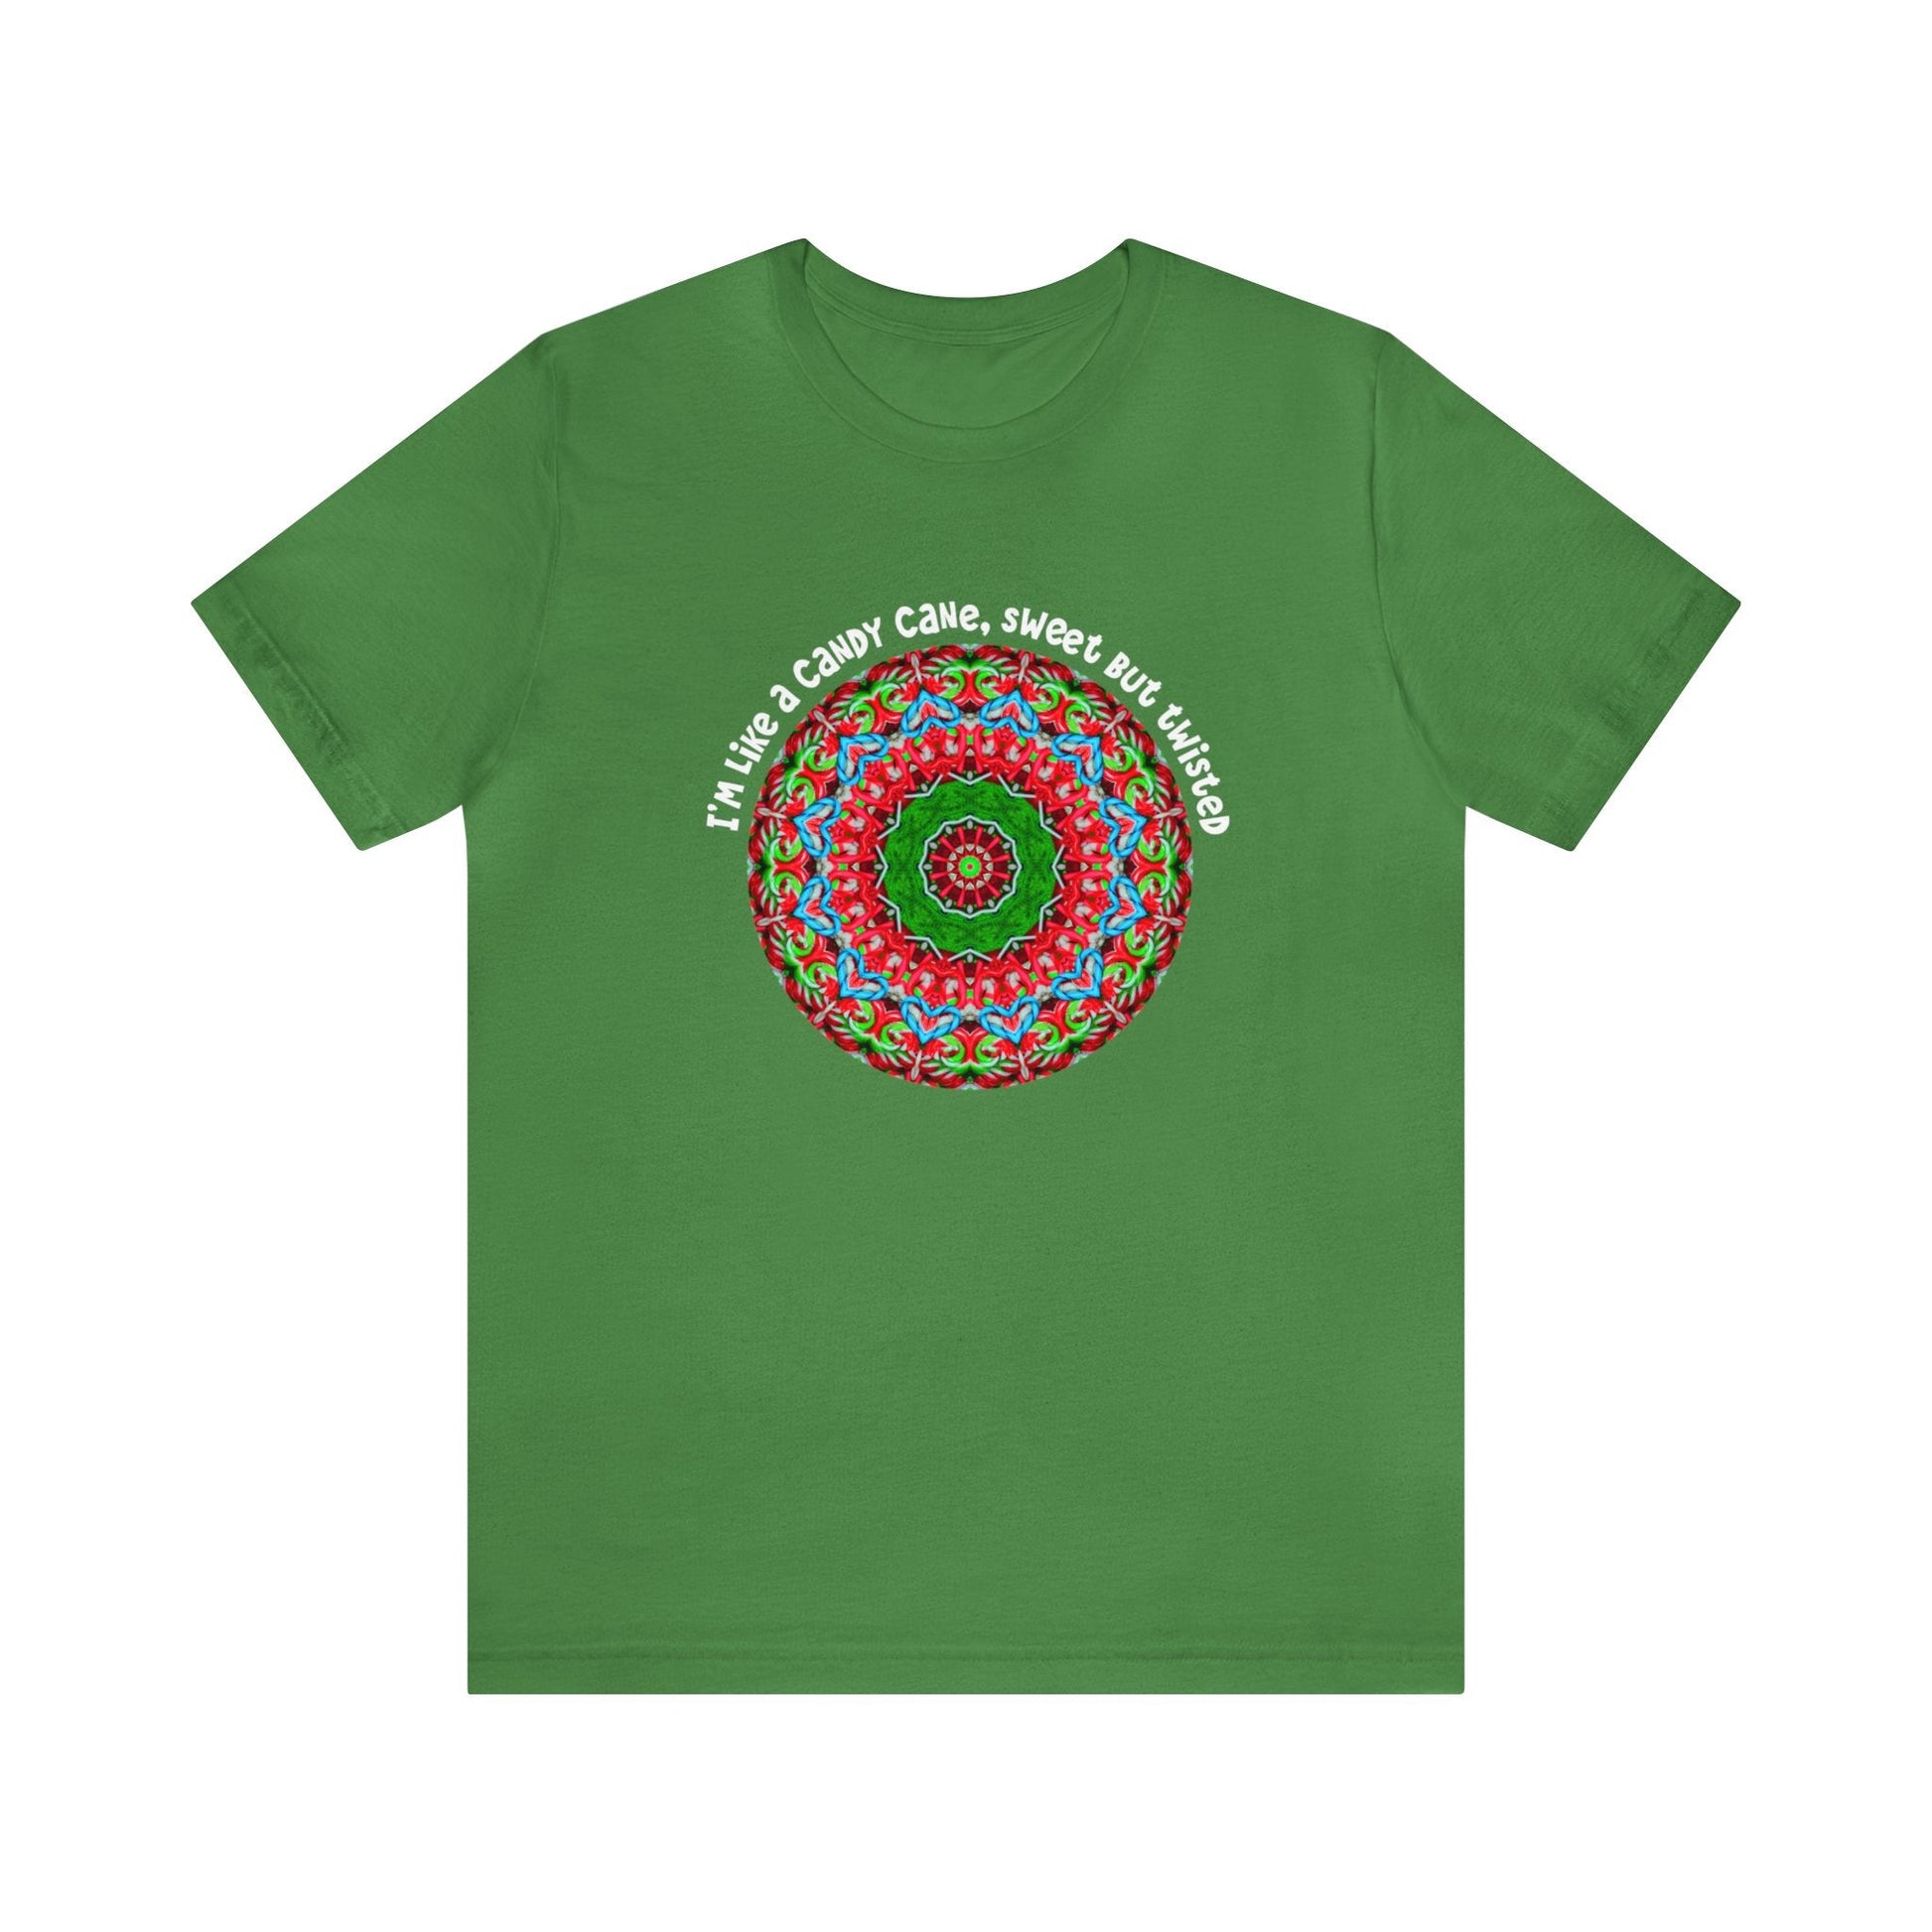 Sarcastic Funny Christmas Shirt - All Day Graphic TShirts, Im like a candy cane cute but twisted Candy Cane Mandala Leaf Green